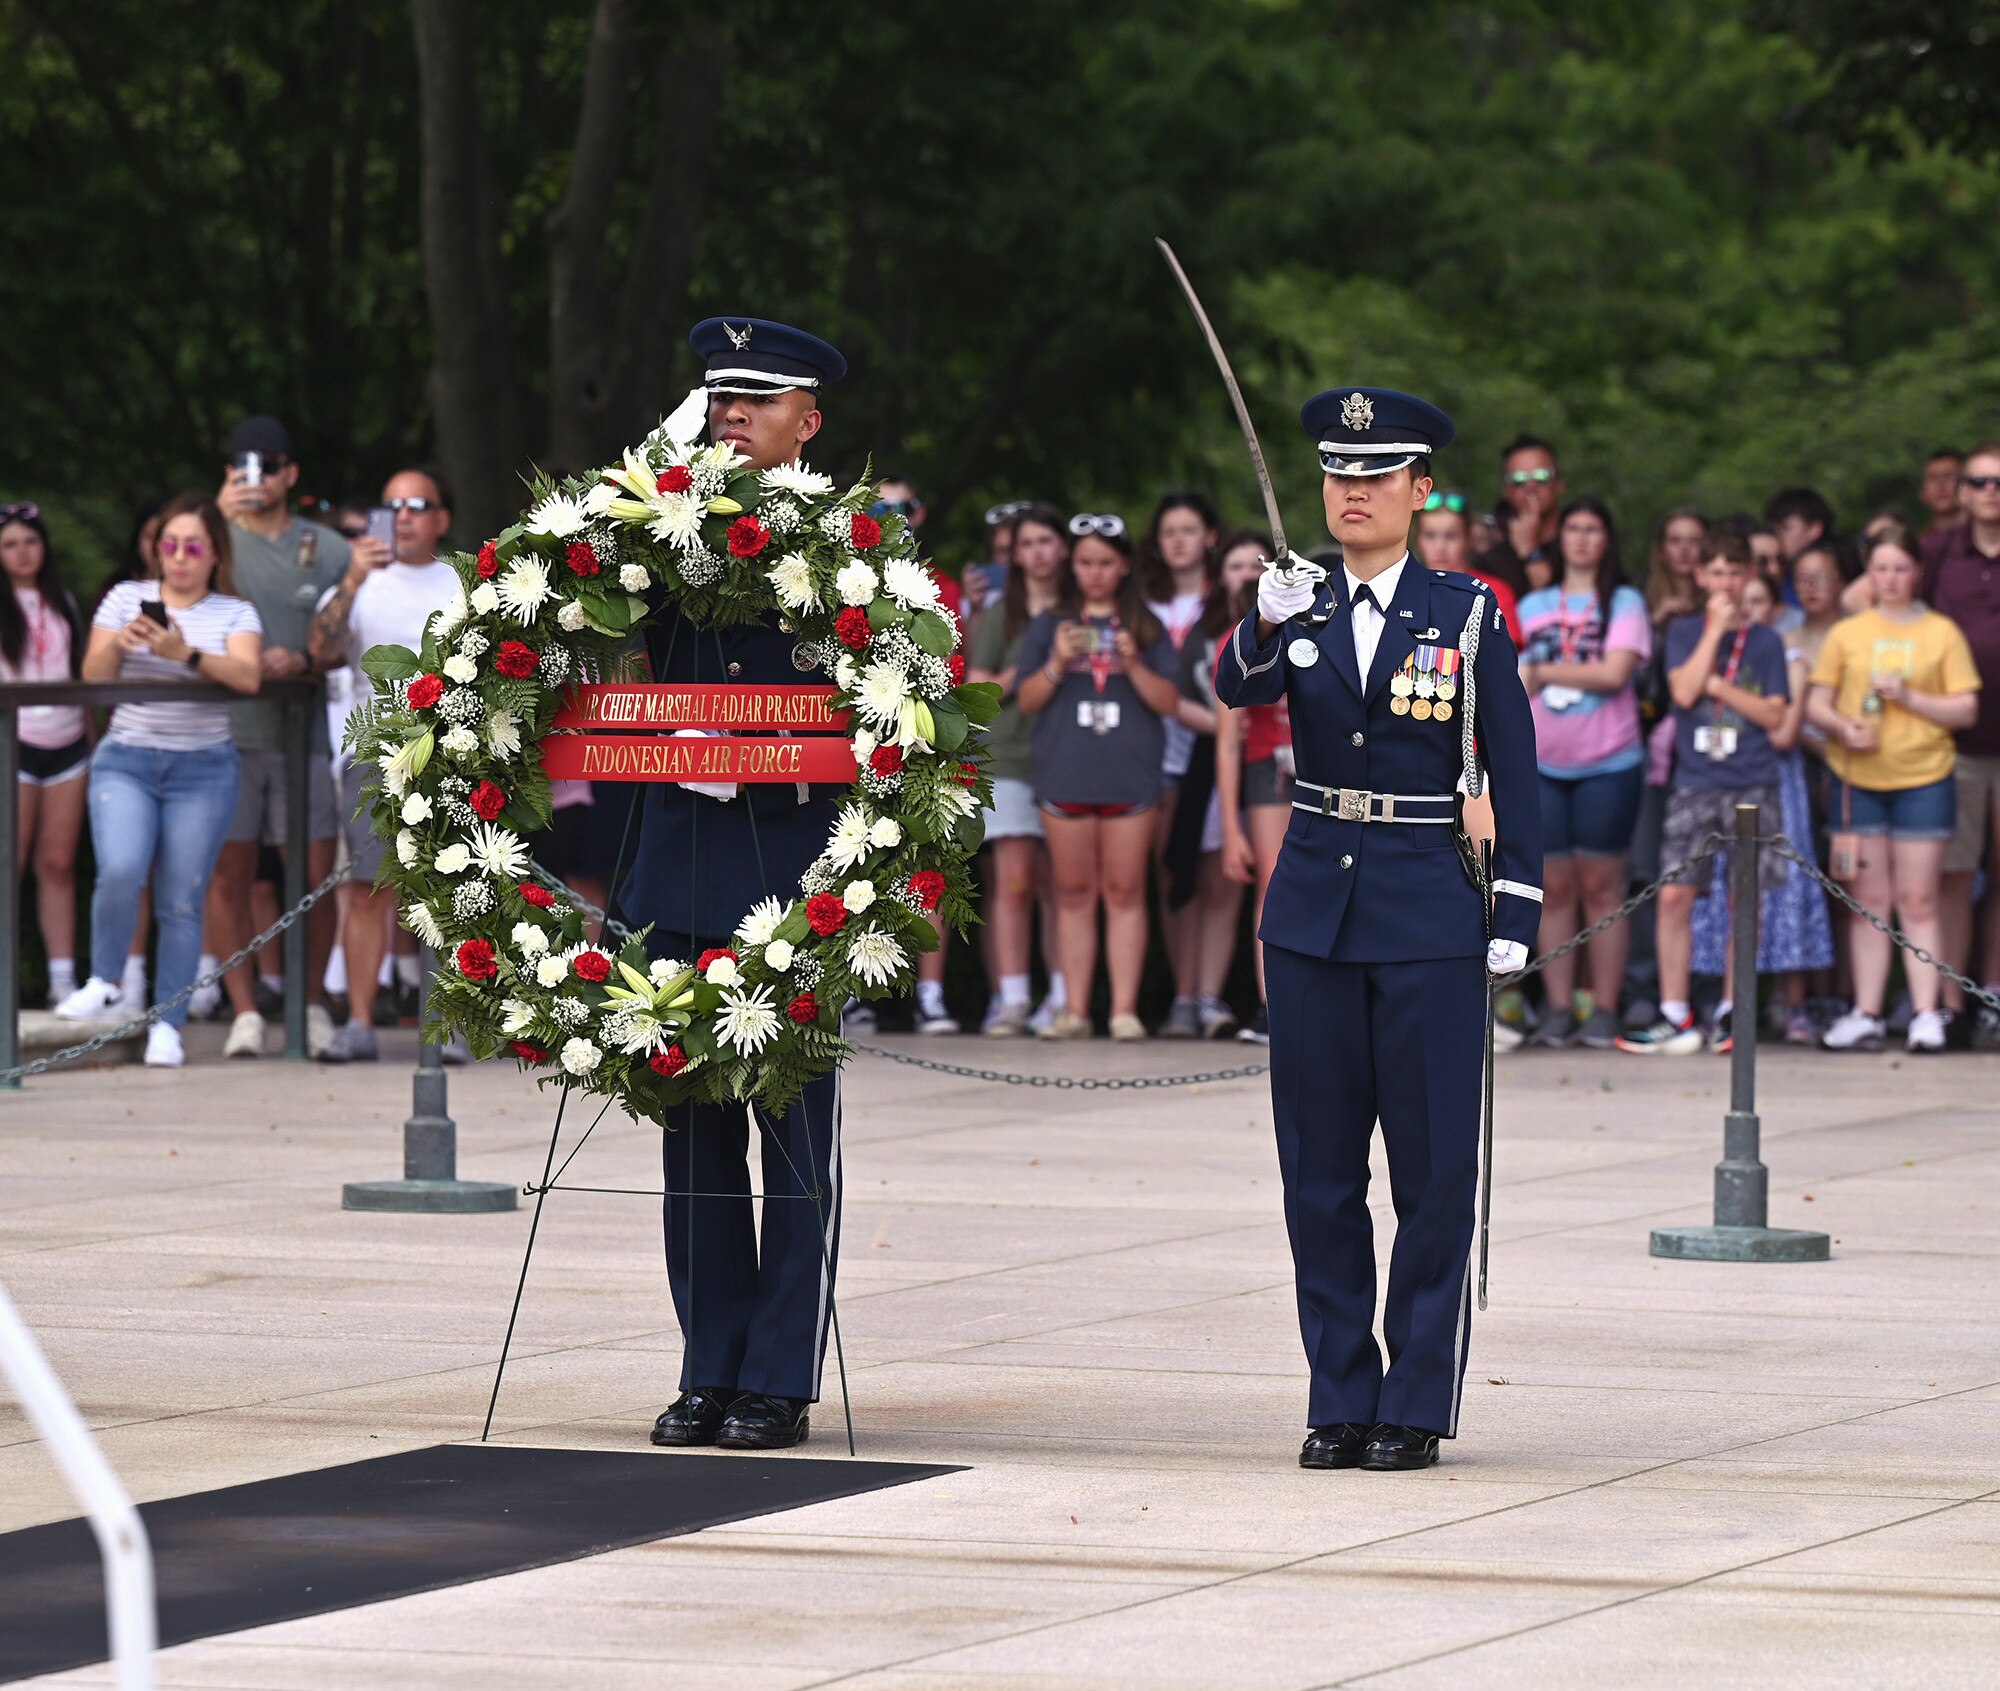 Members of the Air Force Honor Guard stand by to assist Air Force Maj. Gen. Joel Jackson and Indonesian Air Chief Marshal Fadjar Prasetyo with a wreath laying ceremony at the Tomb of the Unknown Soldier